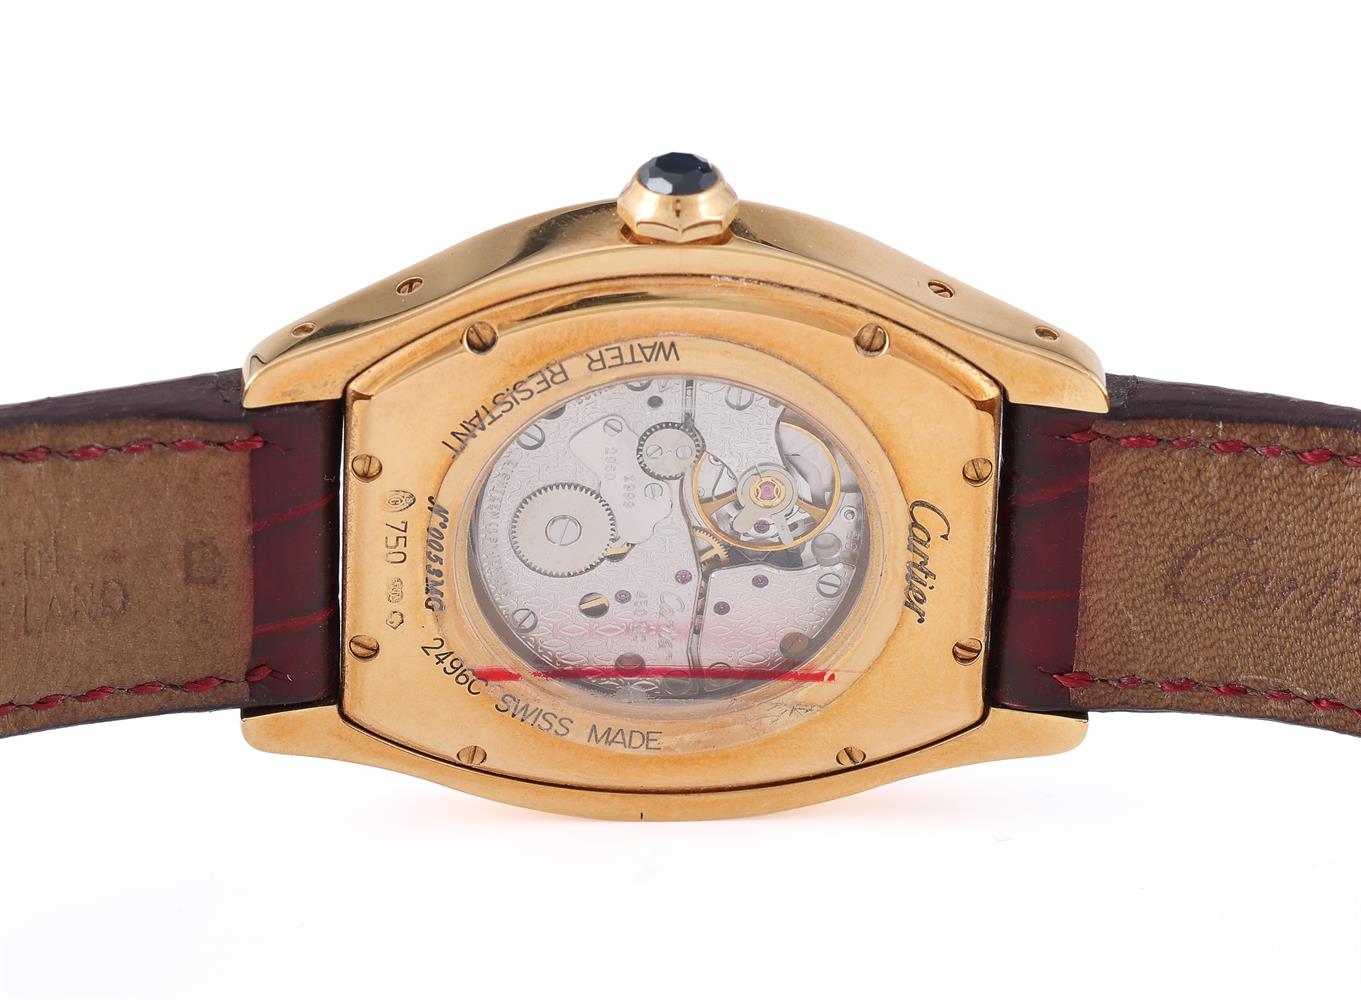 Y CARTIER, COLLECTION PRIVÉE TORTUE, REF. 2496C, AN 18 CARAT GOLD WRISTWATCH - Image 2 of 2